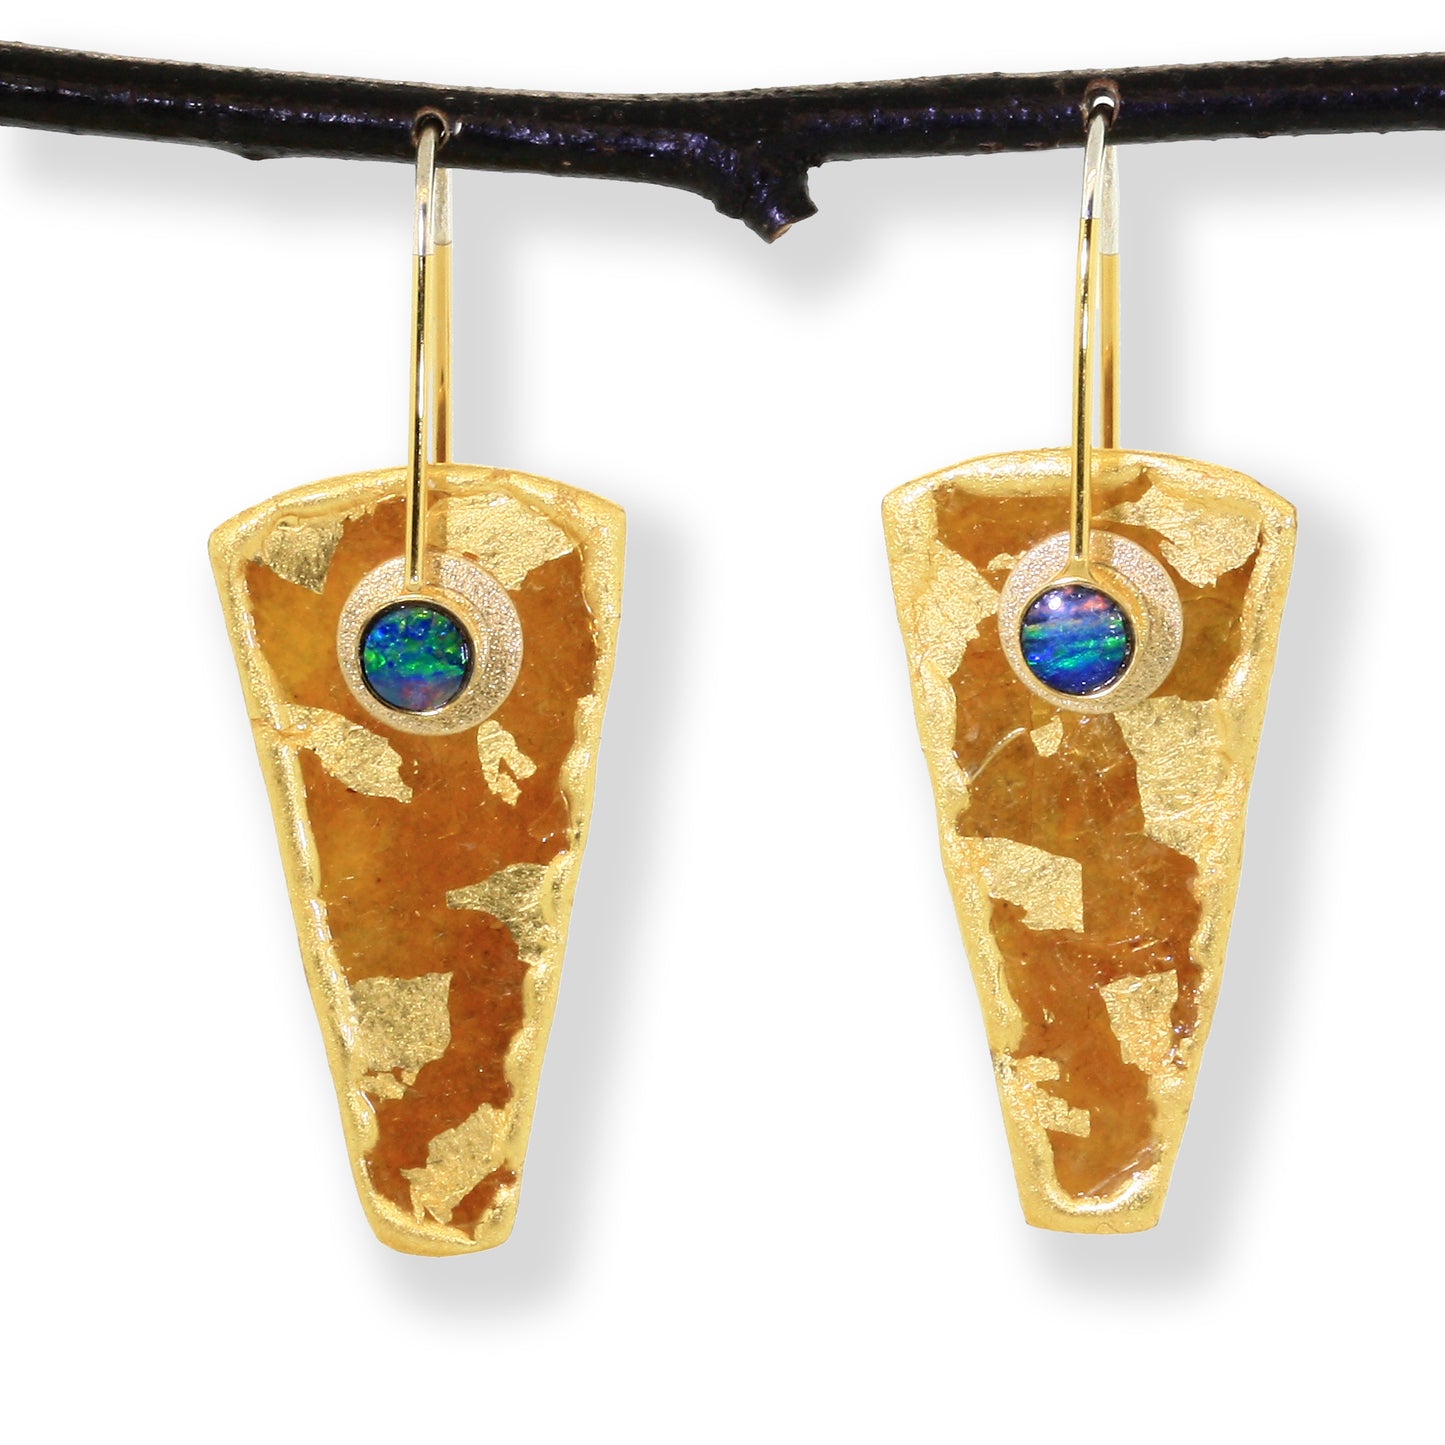 Mica Wedge Earrings with Opals